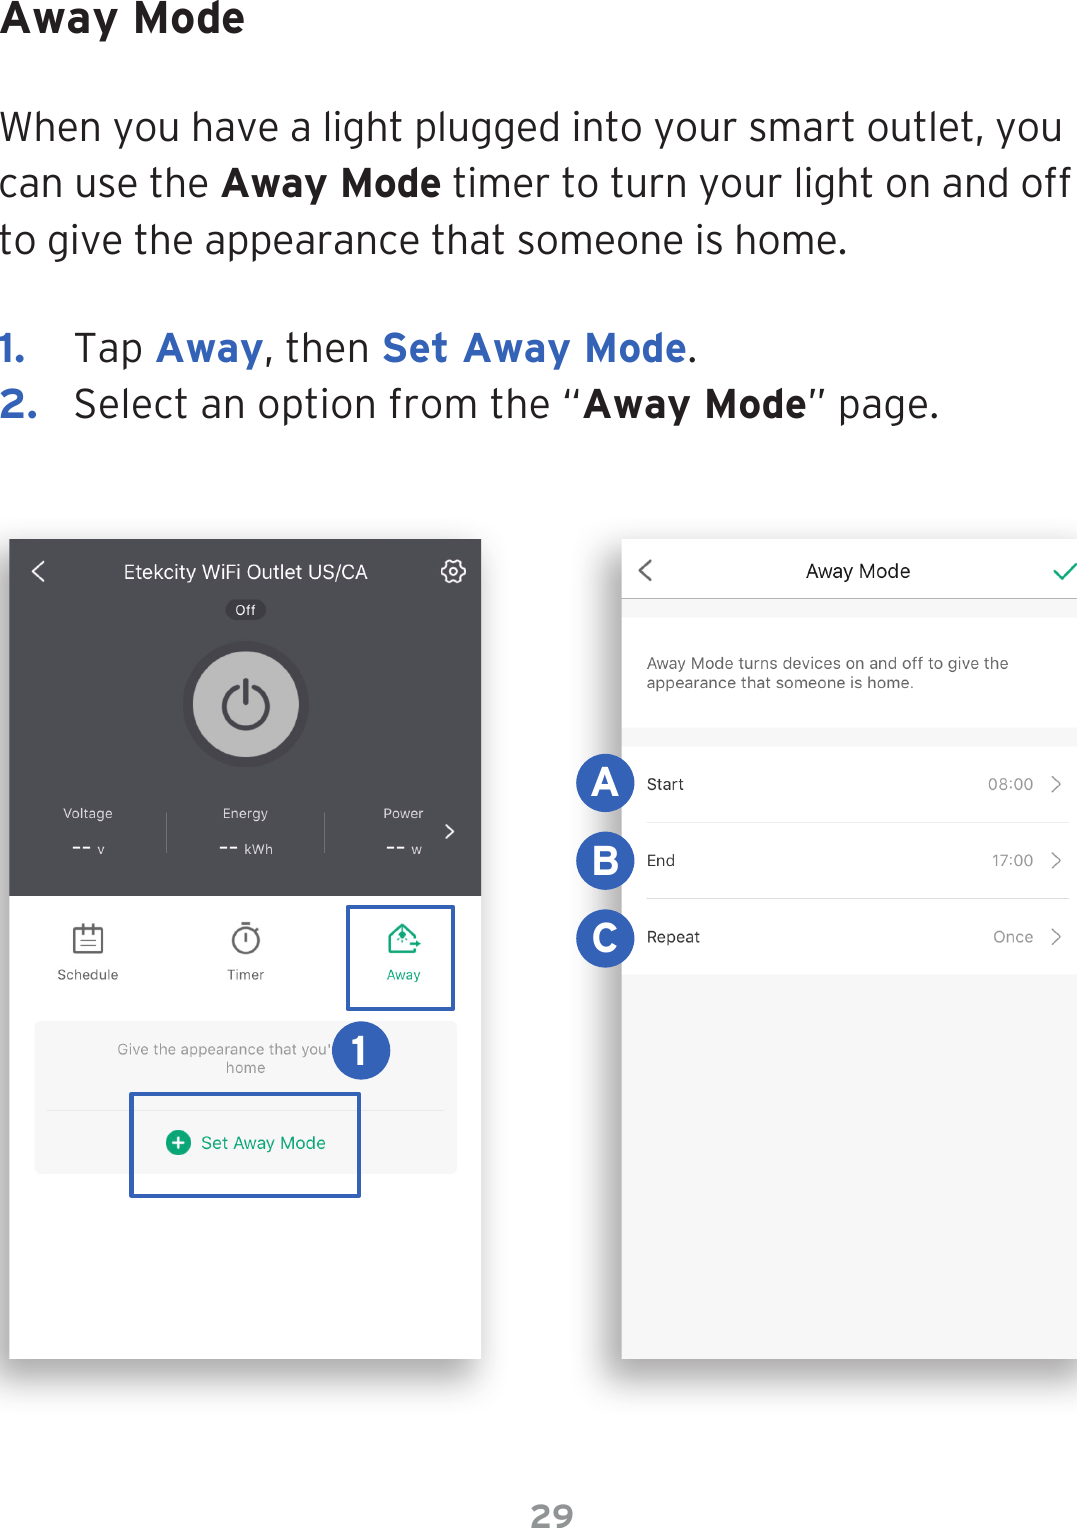 29Away ModeWhen you have a light plugged into your smart outlet, you can use the Away Mode timer to turn your light on and off to give the appearance that someone is home.1.  Tap Away, then Set Away Mode.2.  Select an option from the “Away Mode” page.BAC1